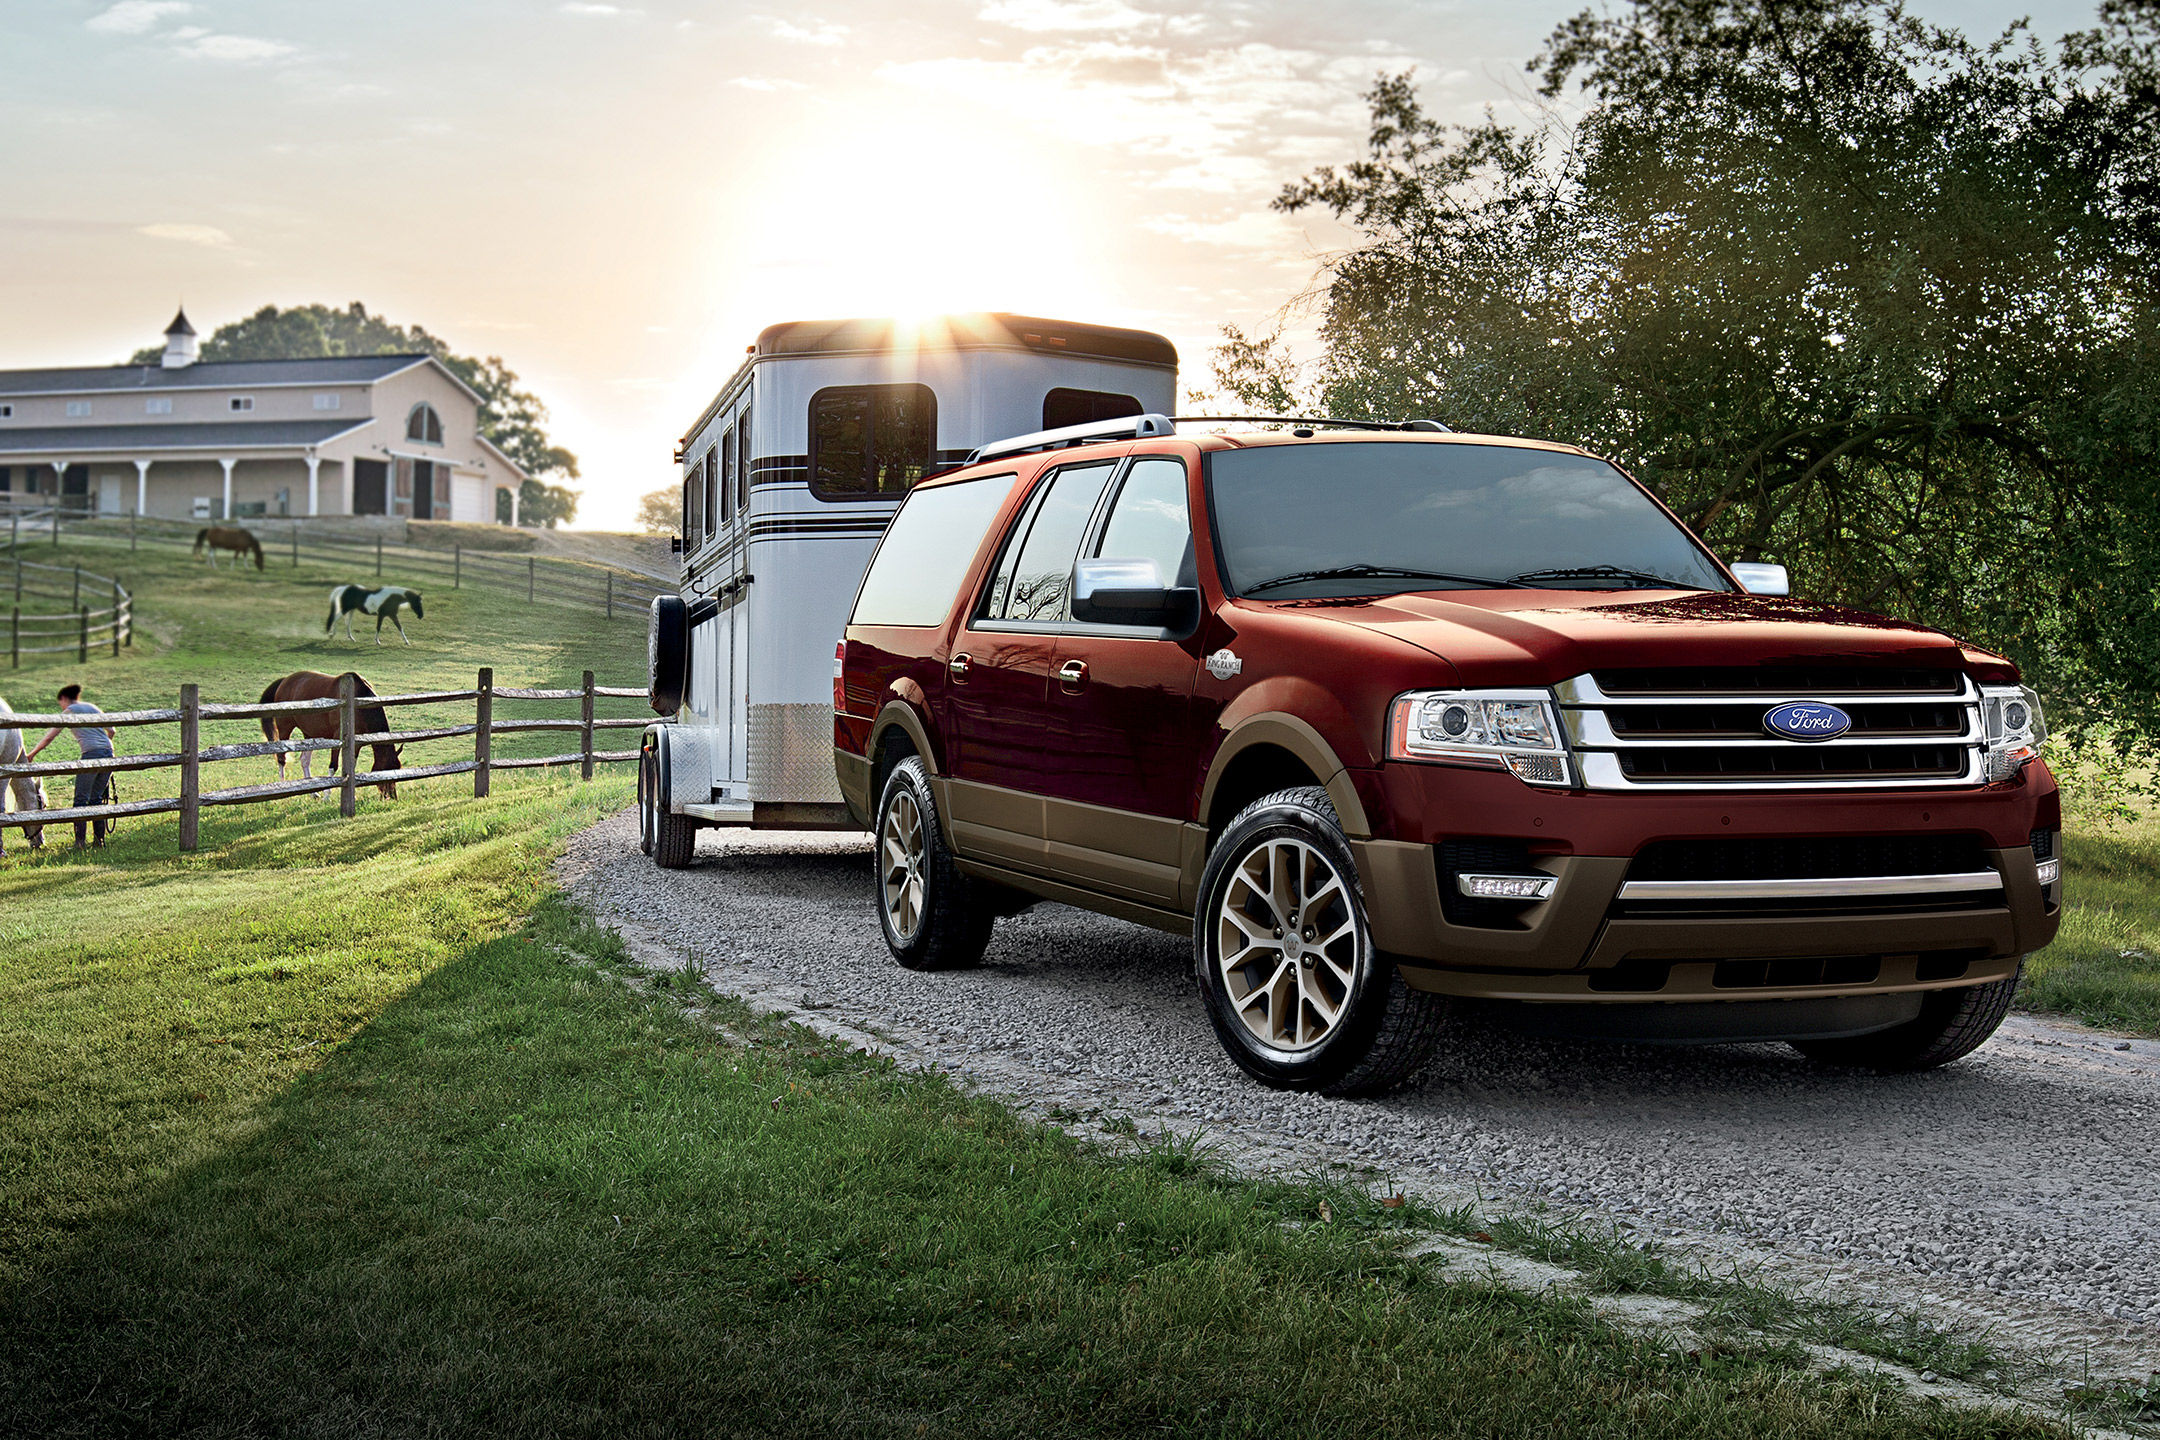 2017 Ford Expedition Overview - The News Wheel